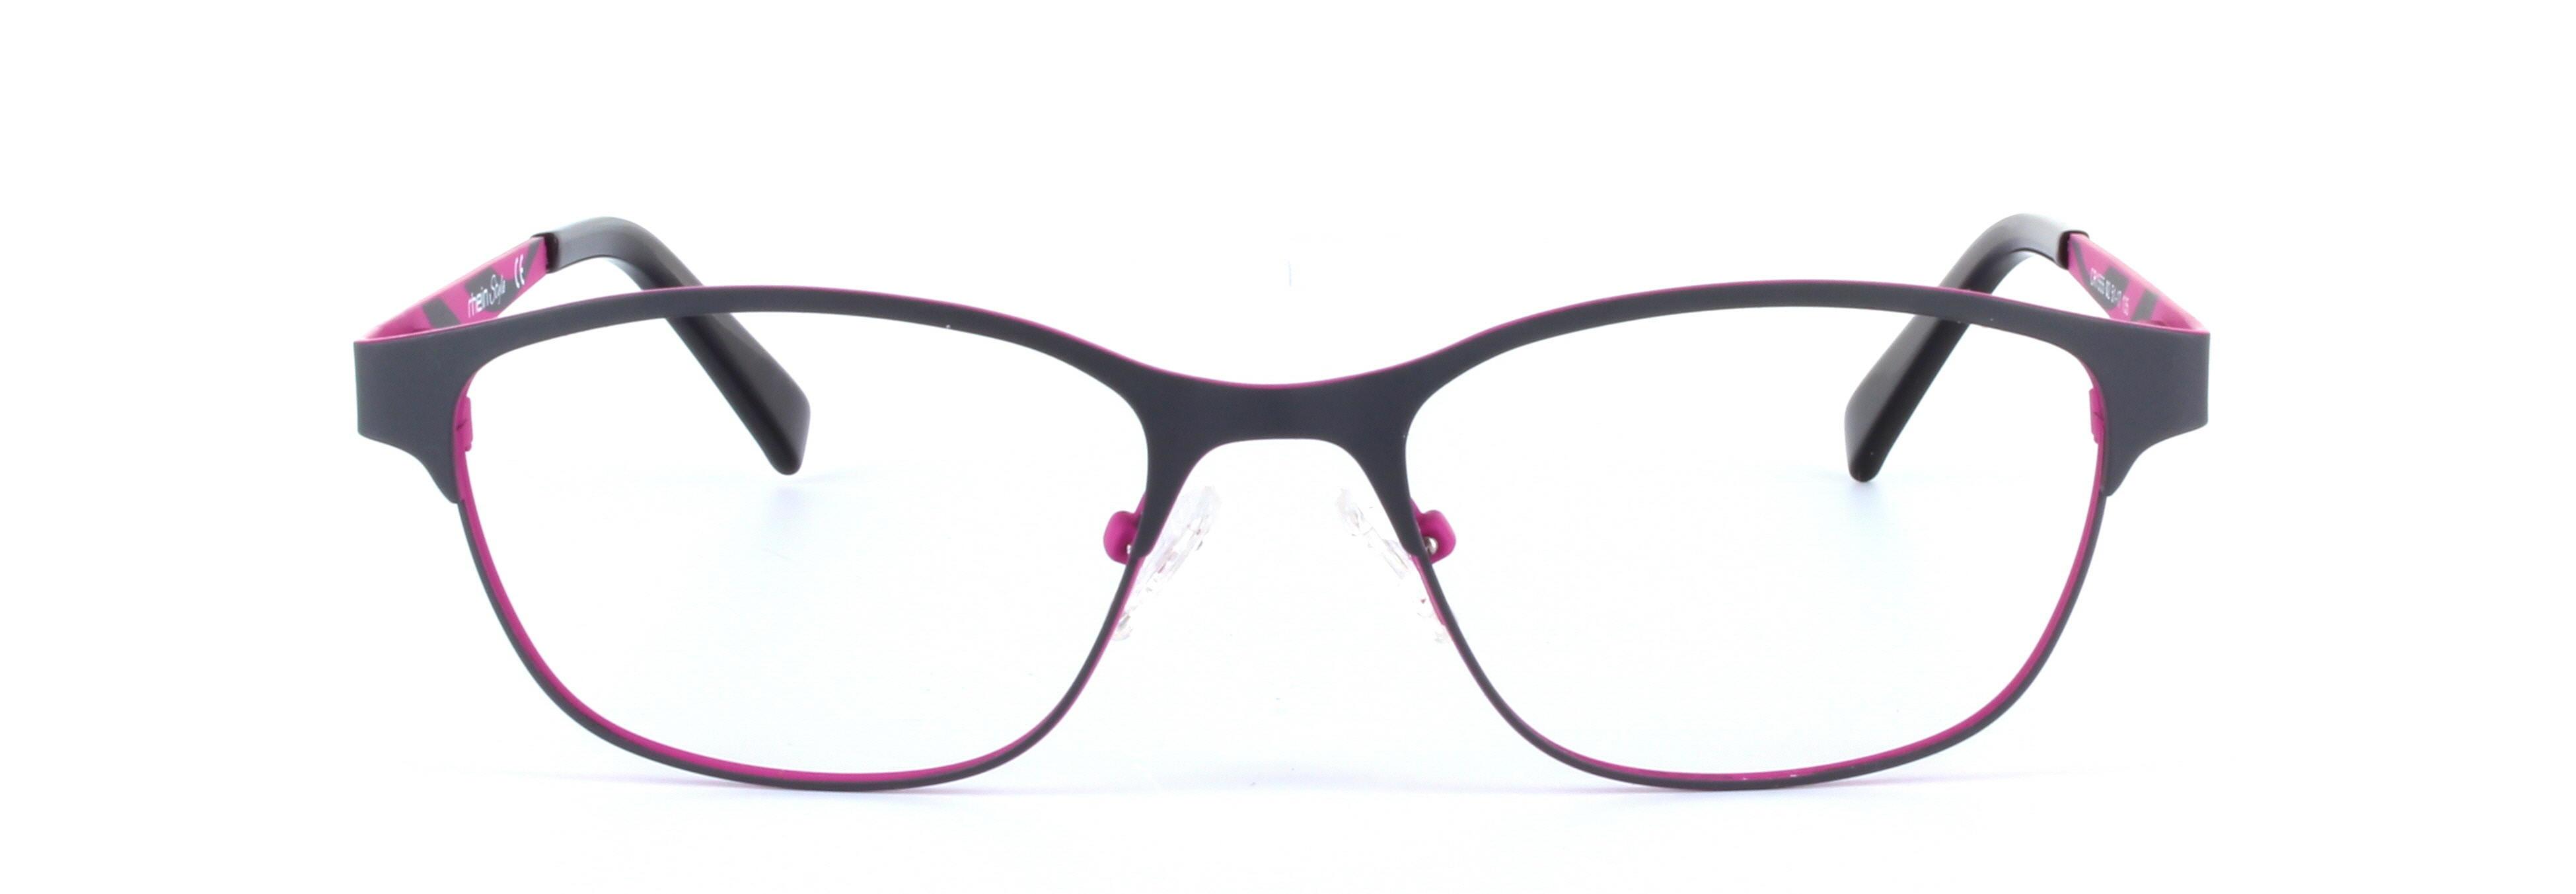 Brown and Pink Full Rim Oval Metal Glasses Lucie - Image View 4